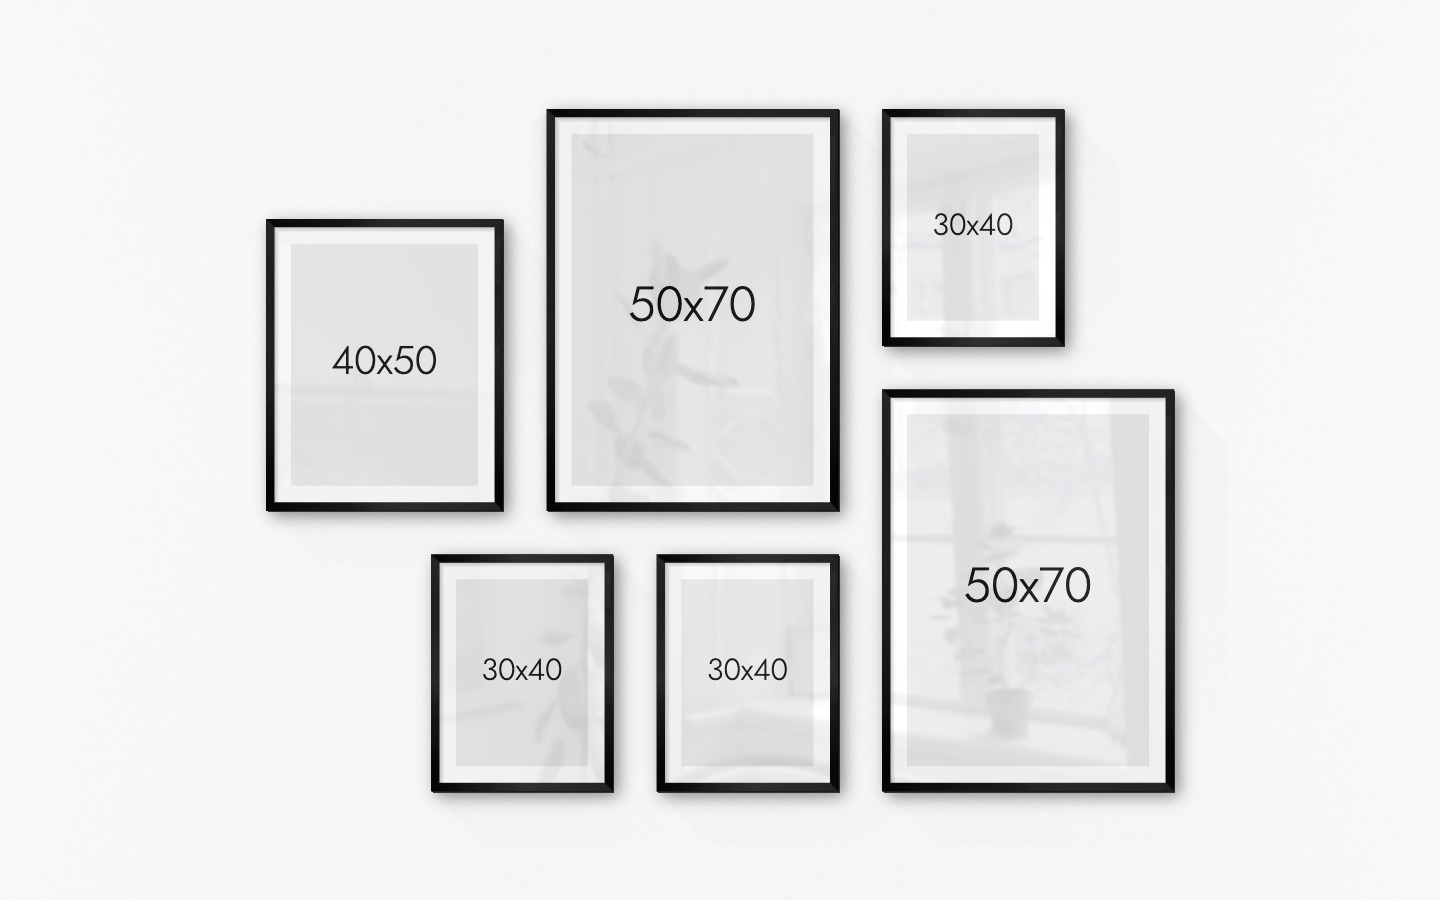 Gallery wall with picture frames in black in sizes 40x50, 50x70 and 30x40